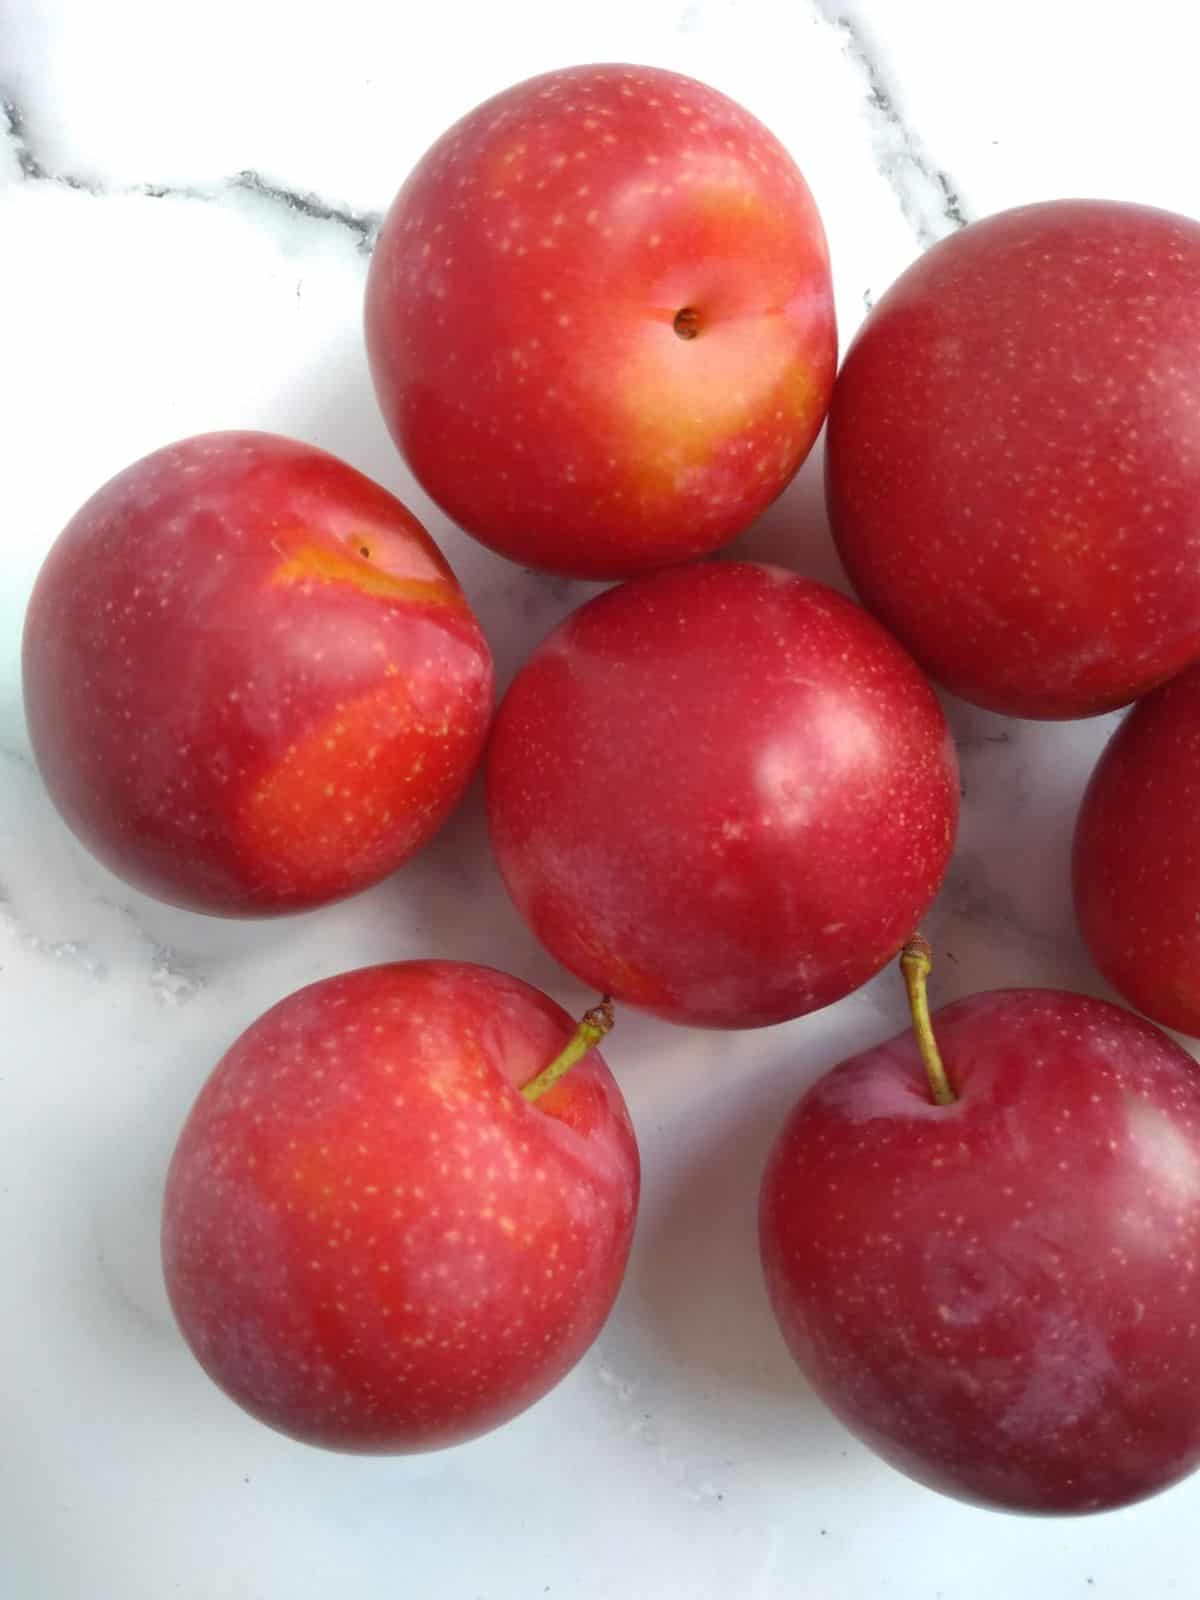 Cherry and plum hybrid sitting on a white background. They are red in color with spots.